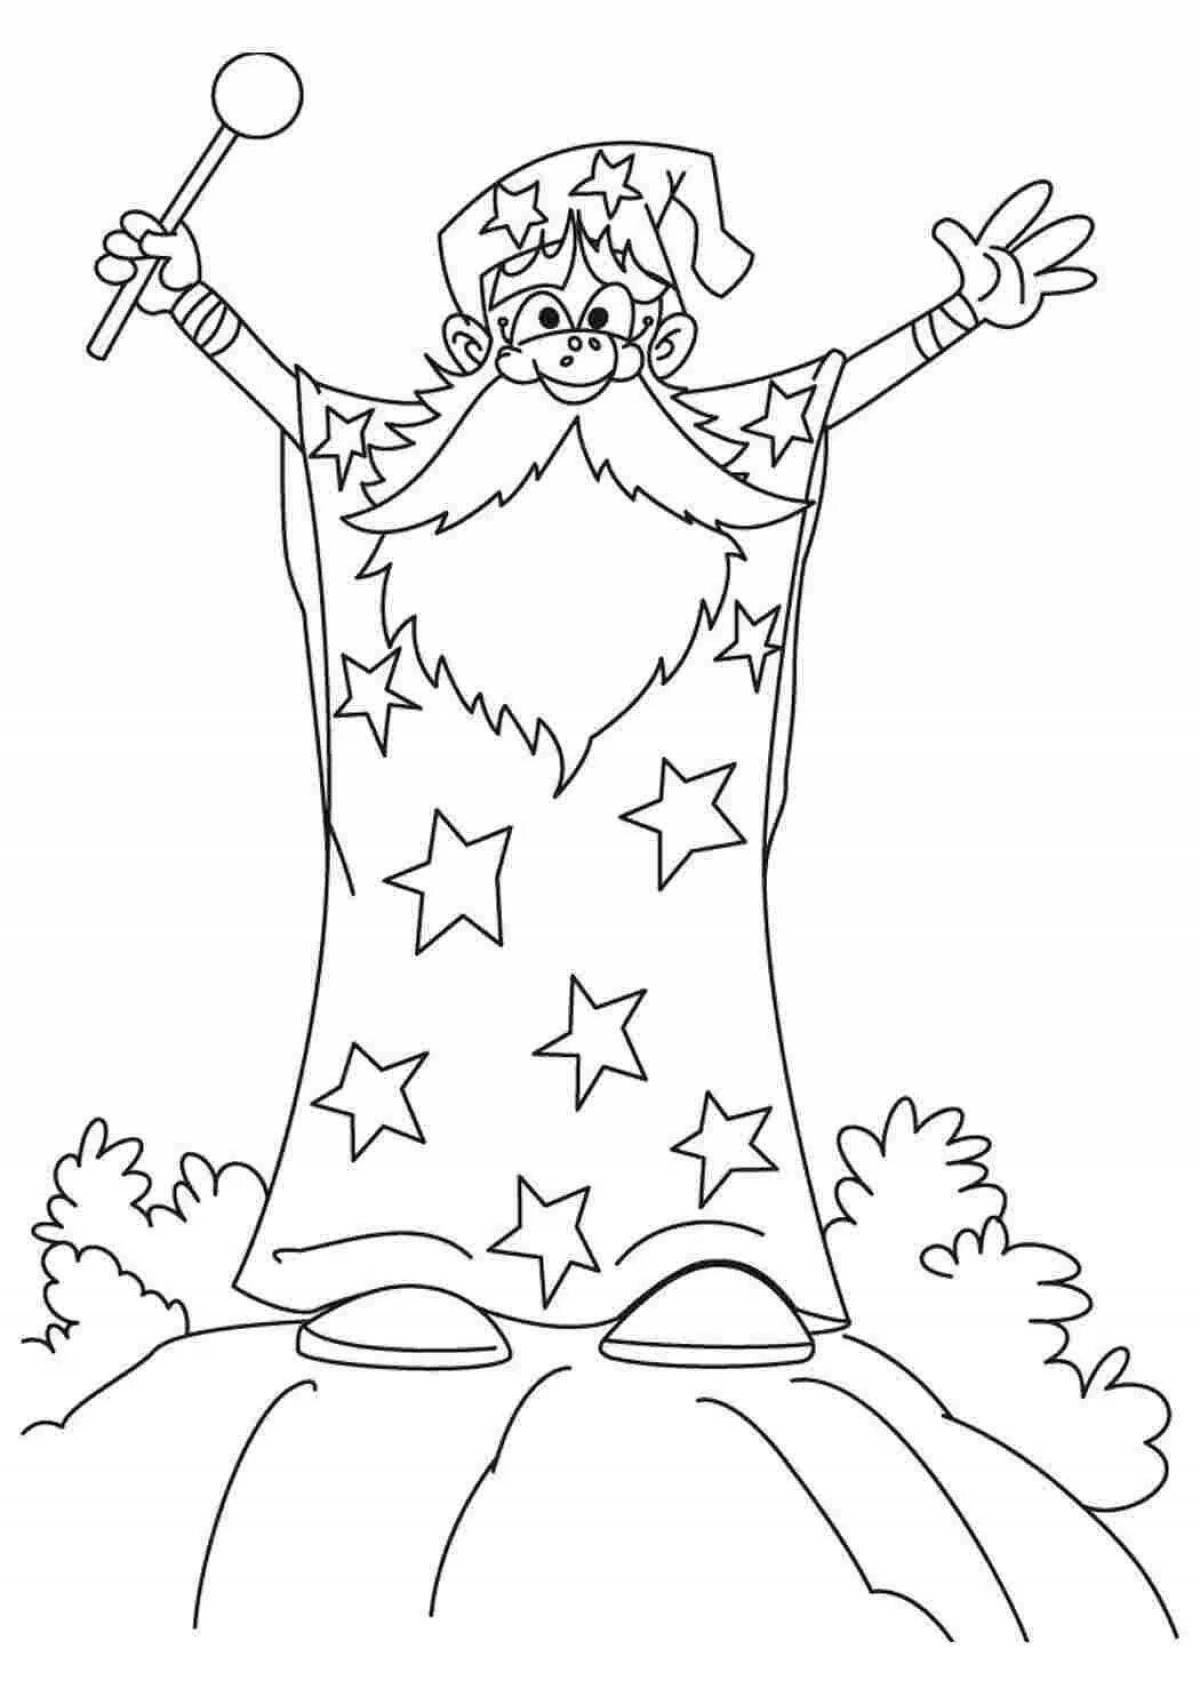 Merry wizard coloring for children